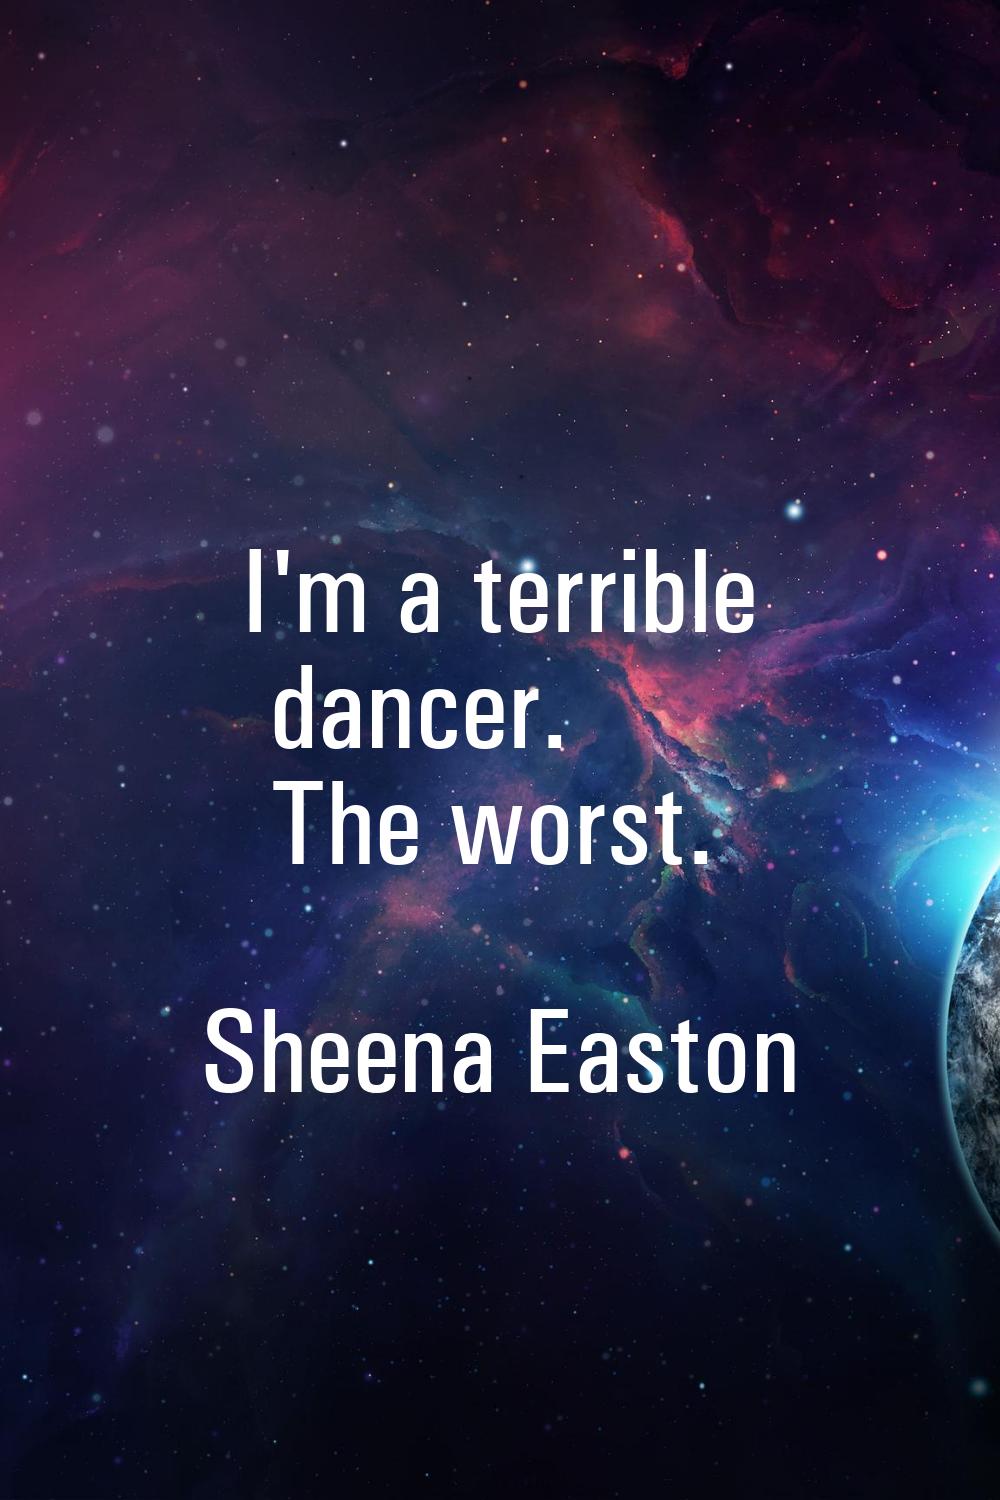 I'm a terrible dancer. The worst.